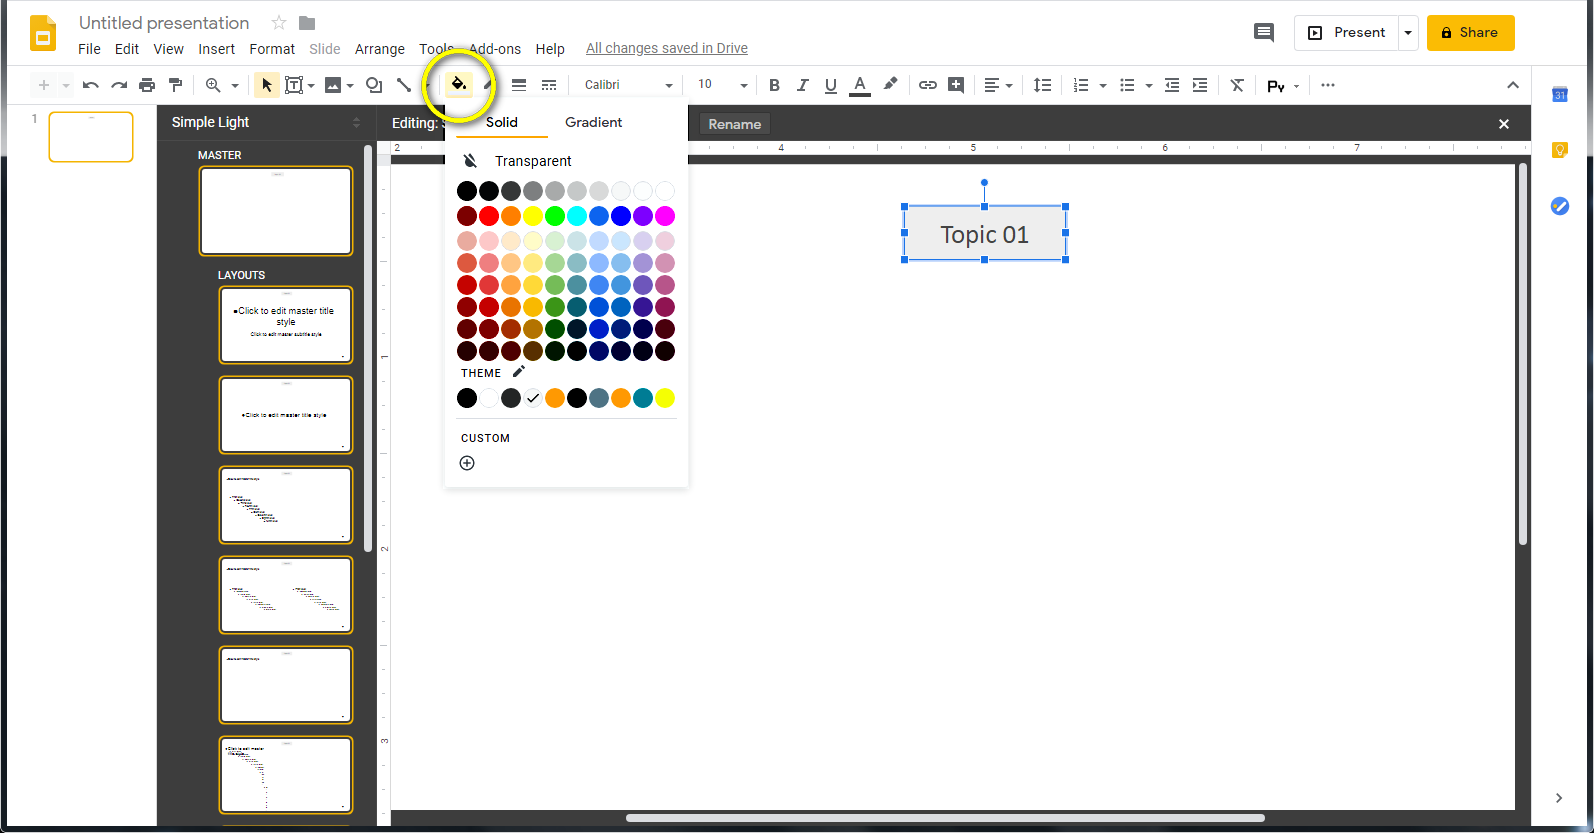 Make your tab a not contrasting color from the background to avoid viewer distracting